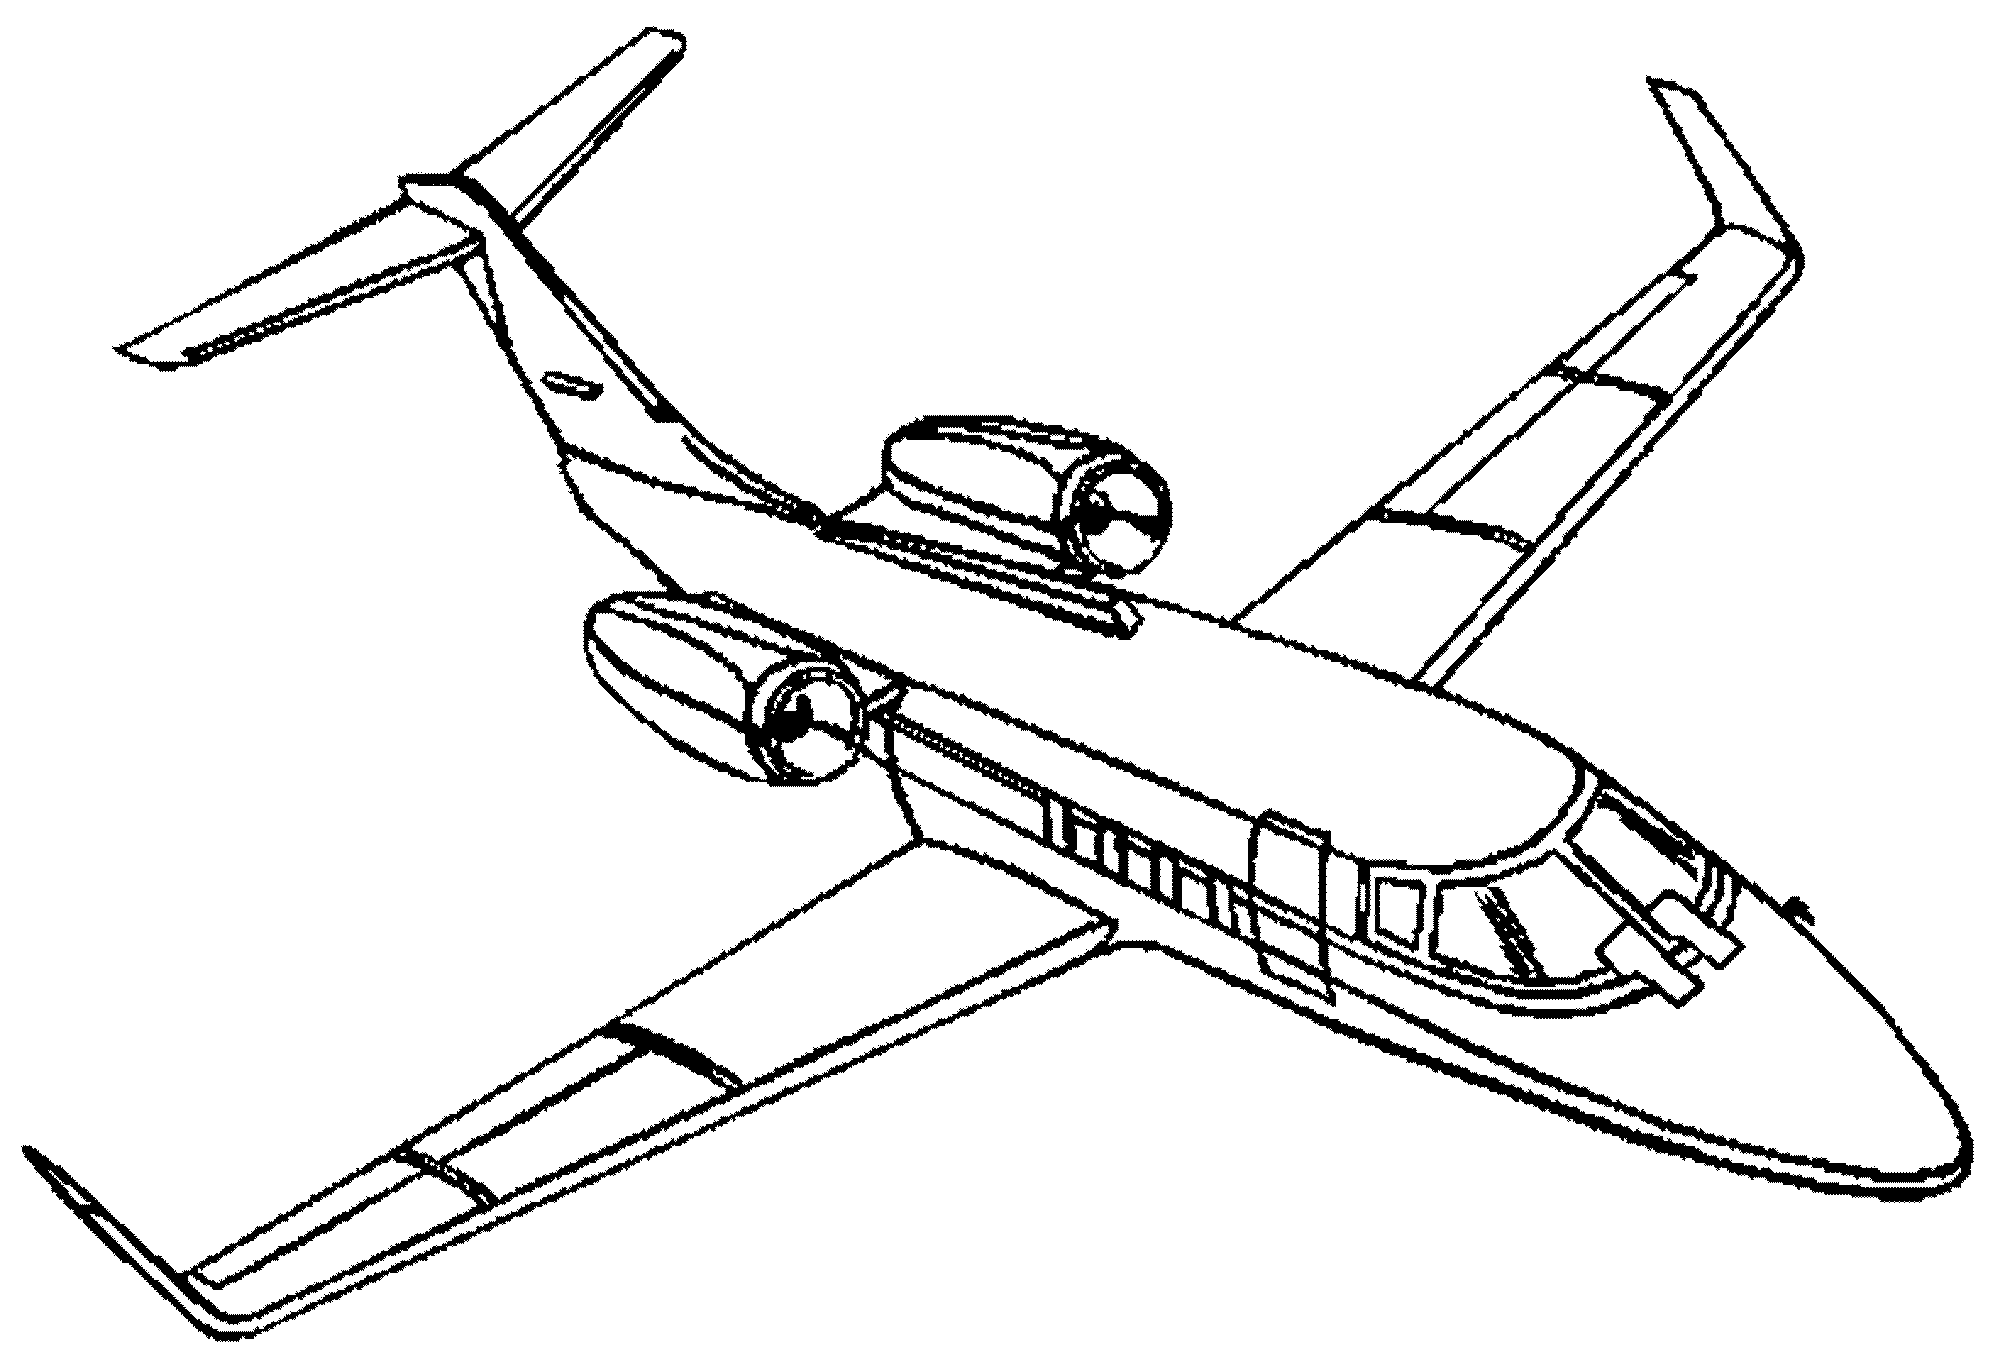 Coloring : Fantastic Freeable Airplane Coloring Pages For Kids Tot Excelent  Printable Free Dialogueeurope Army 59 Excelent Jet Coloring Pages ~ Sstra  Coloring